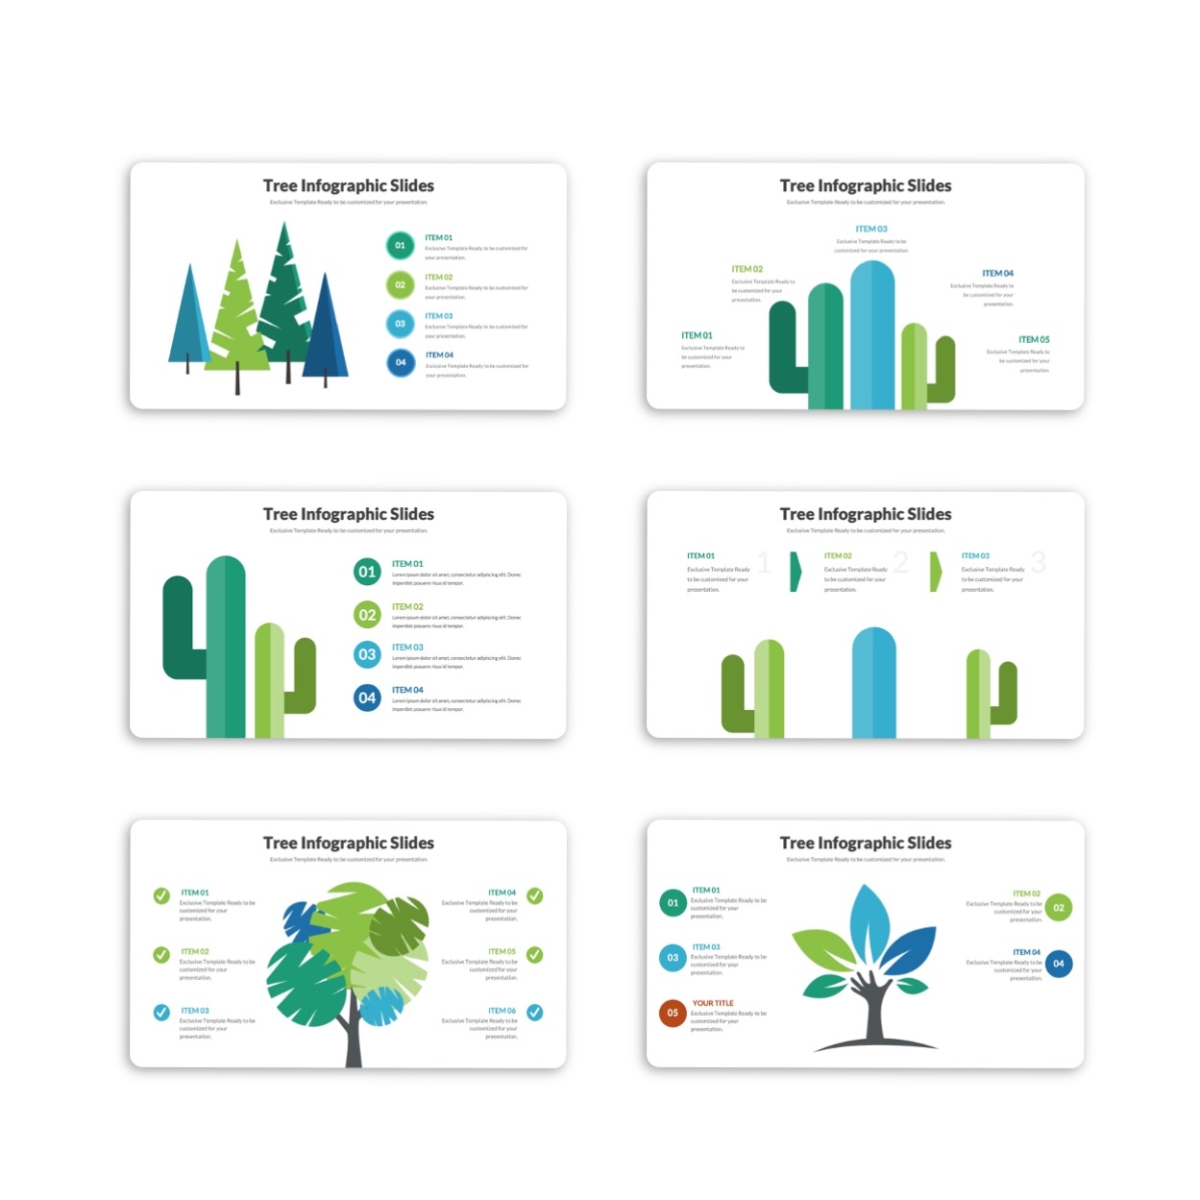 Tree Infographic PowerPoint Slides